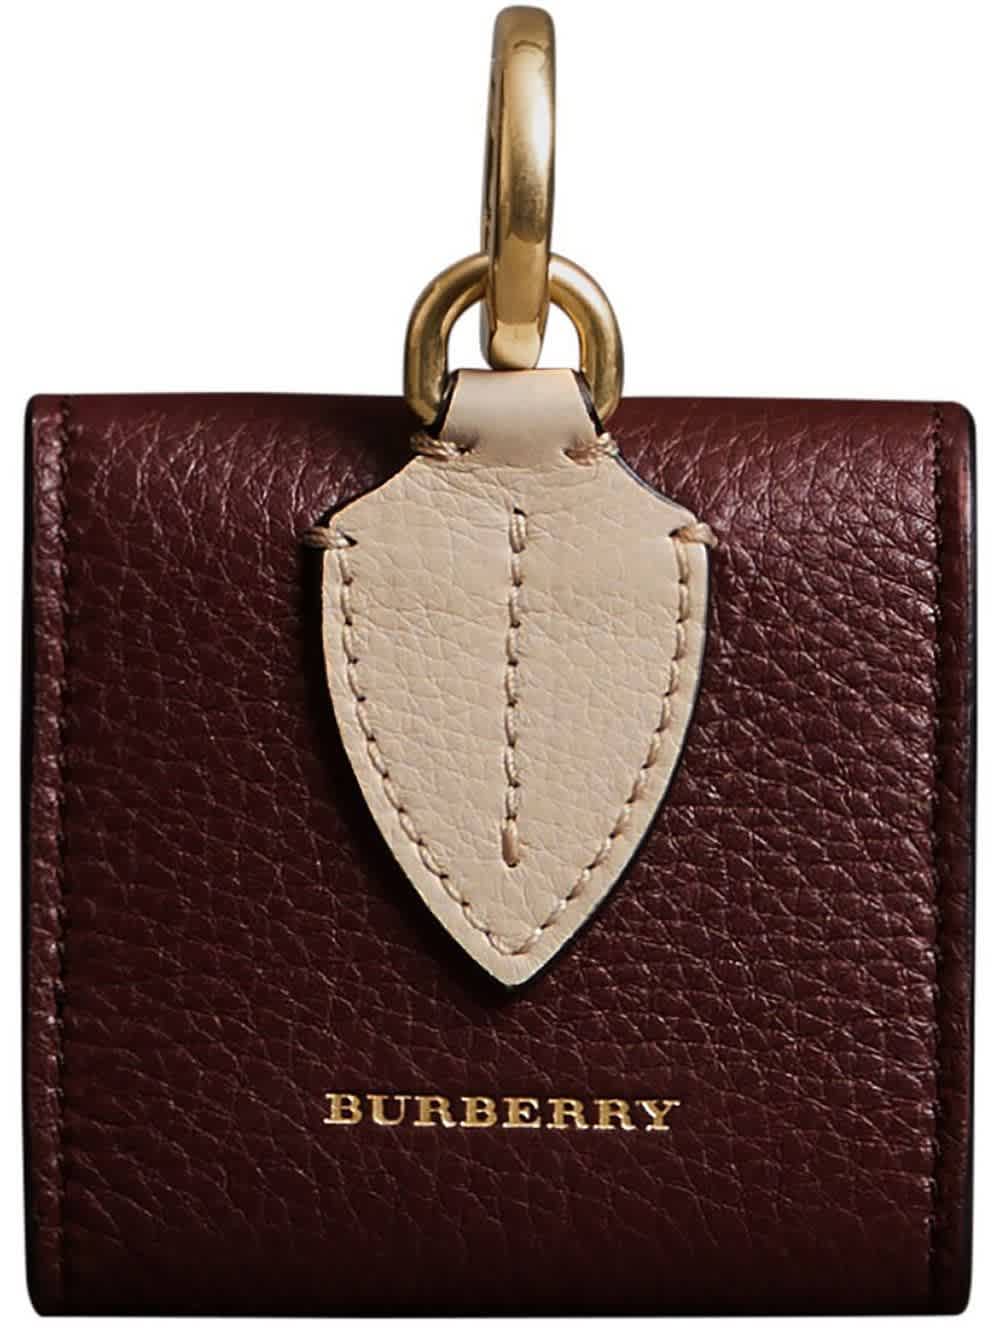 Burberry Small Square Leather Coin Case Charm In Deep Claret/limestone